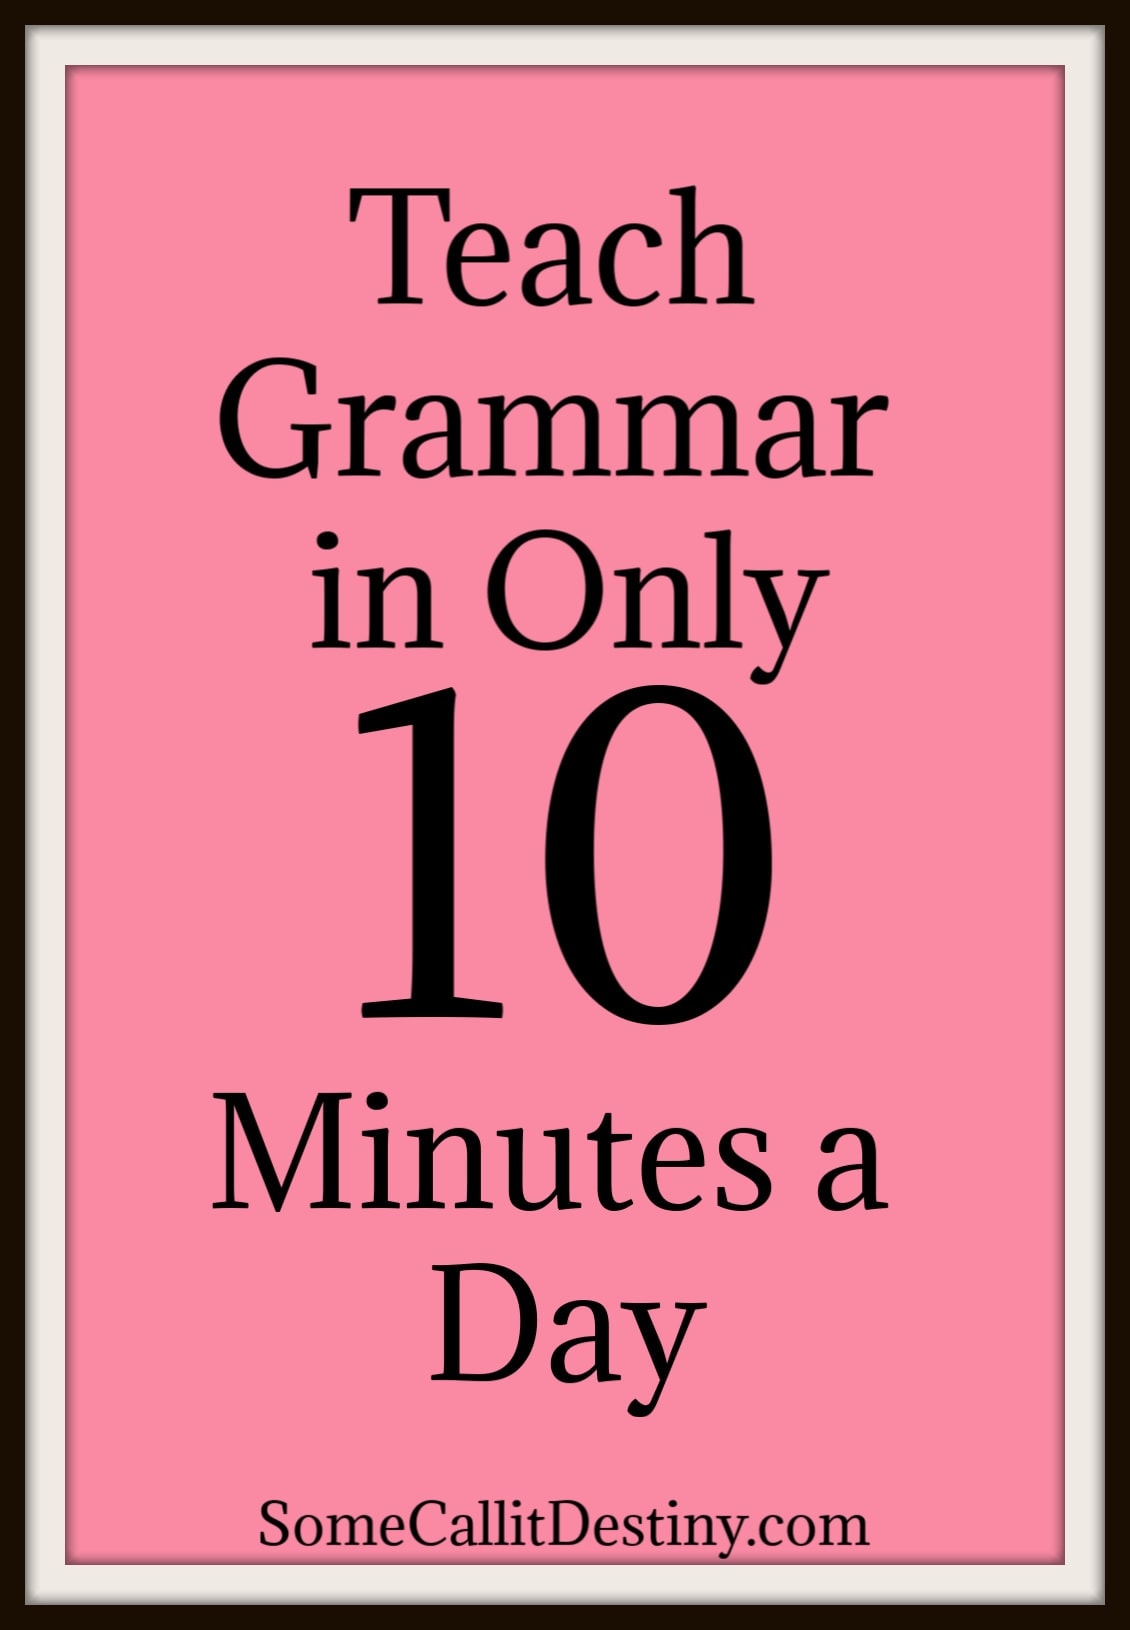 10 minute grammar lessons with easy grammar